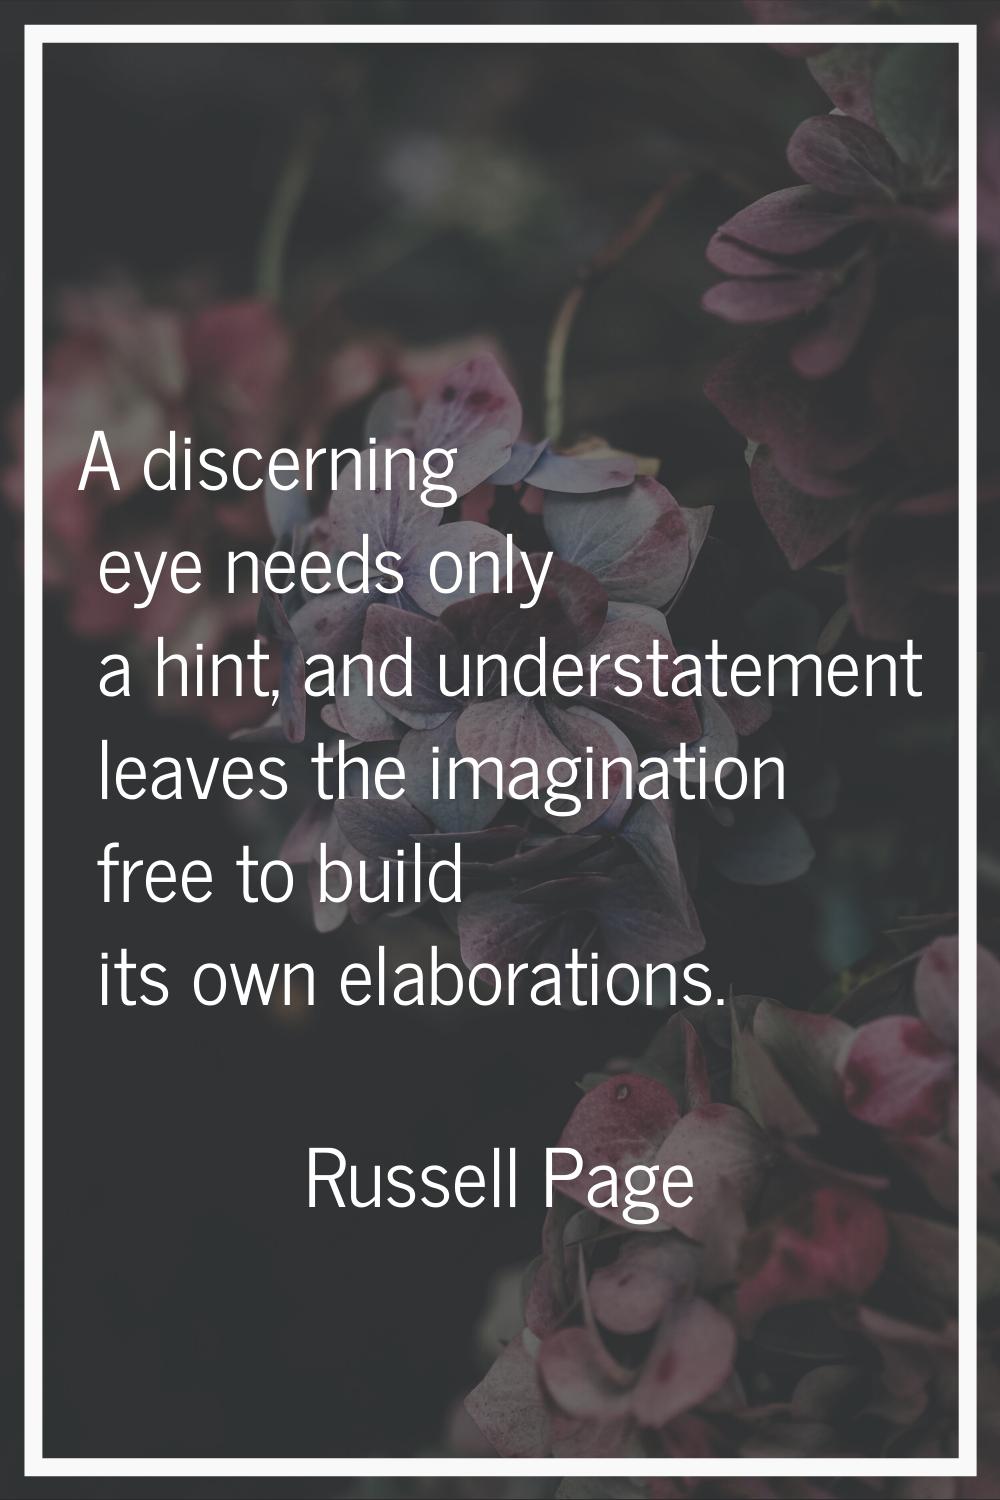 A discerning eye needs only a hint, and understatement leaves the imagination free to build its own